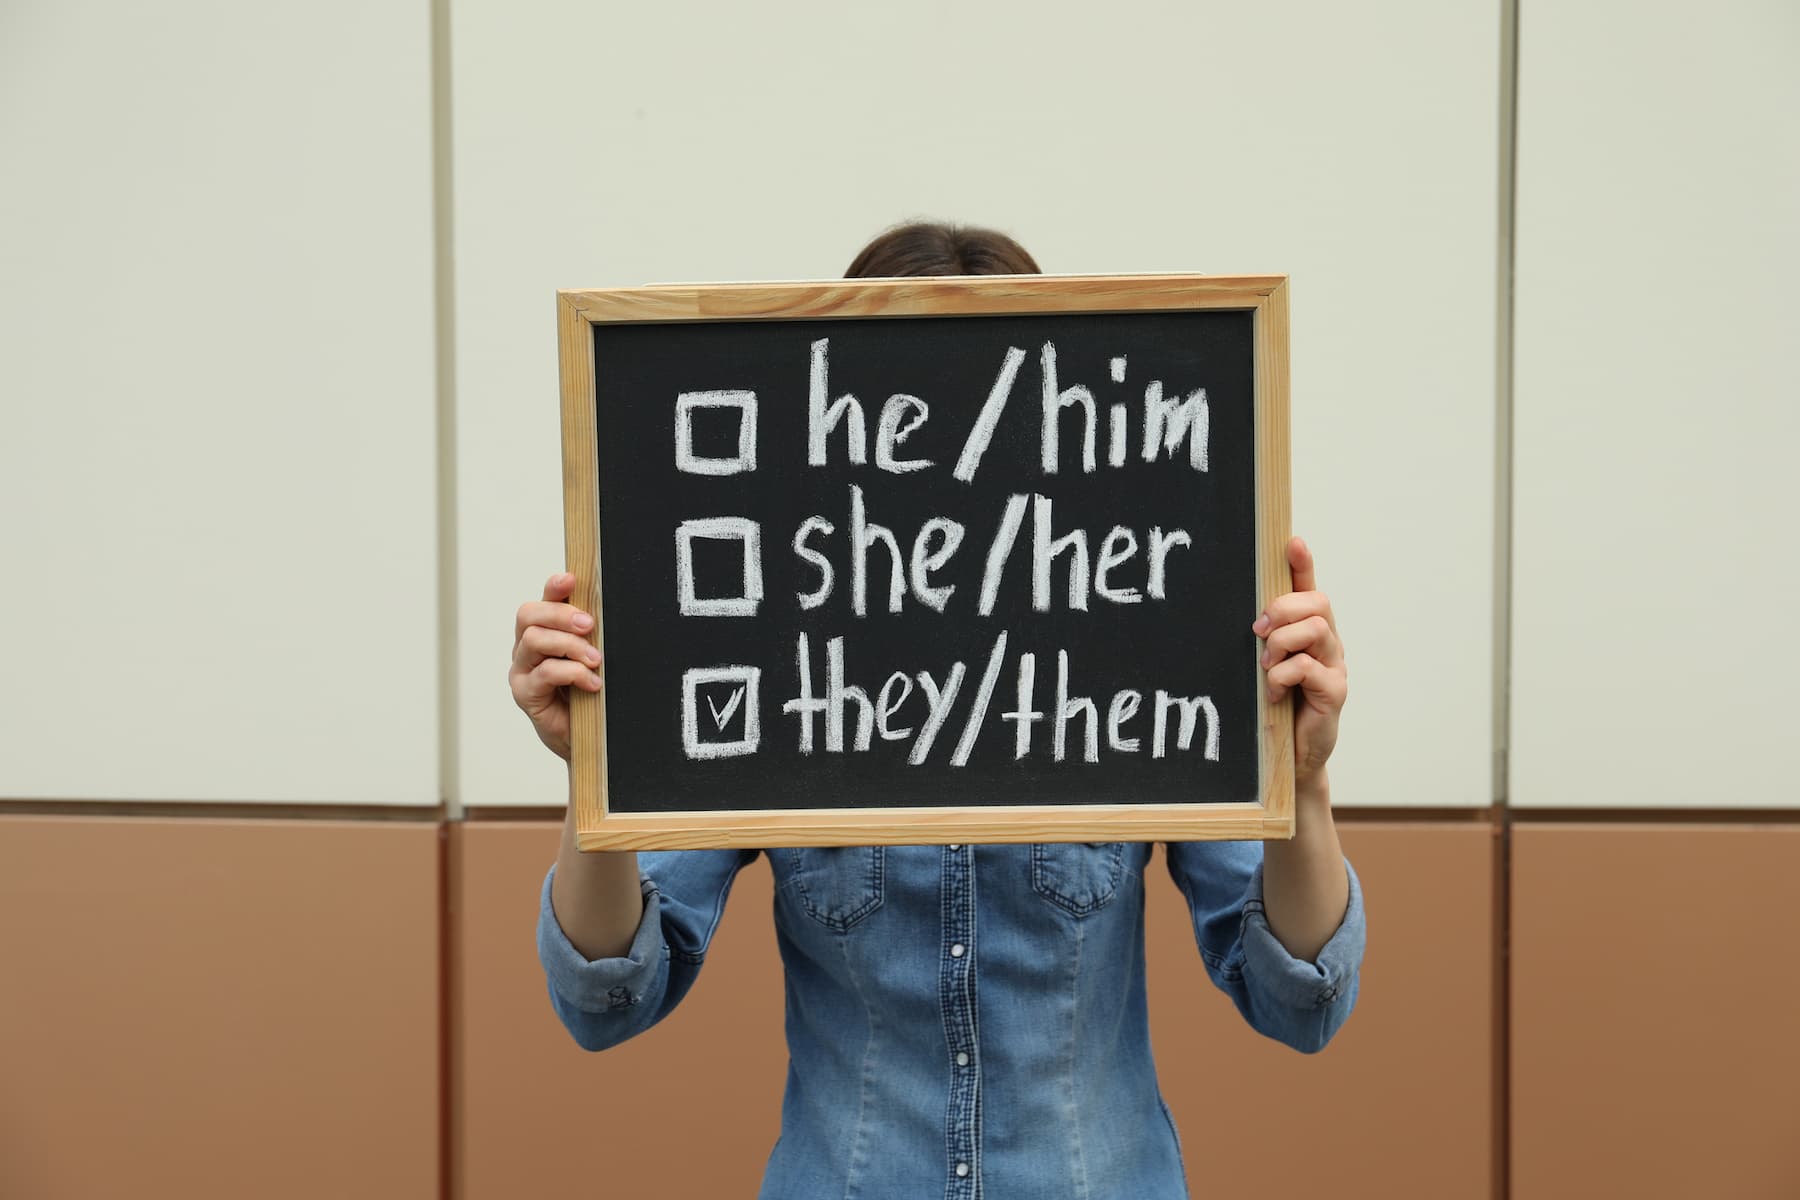 Why Are Pronouns So Important in the Workplace?